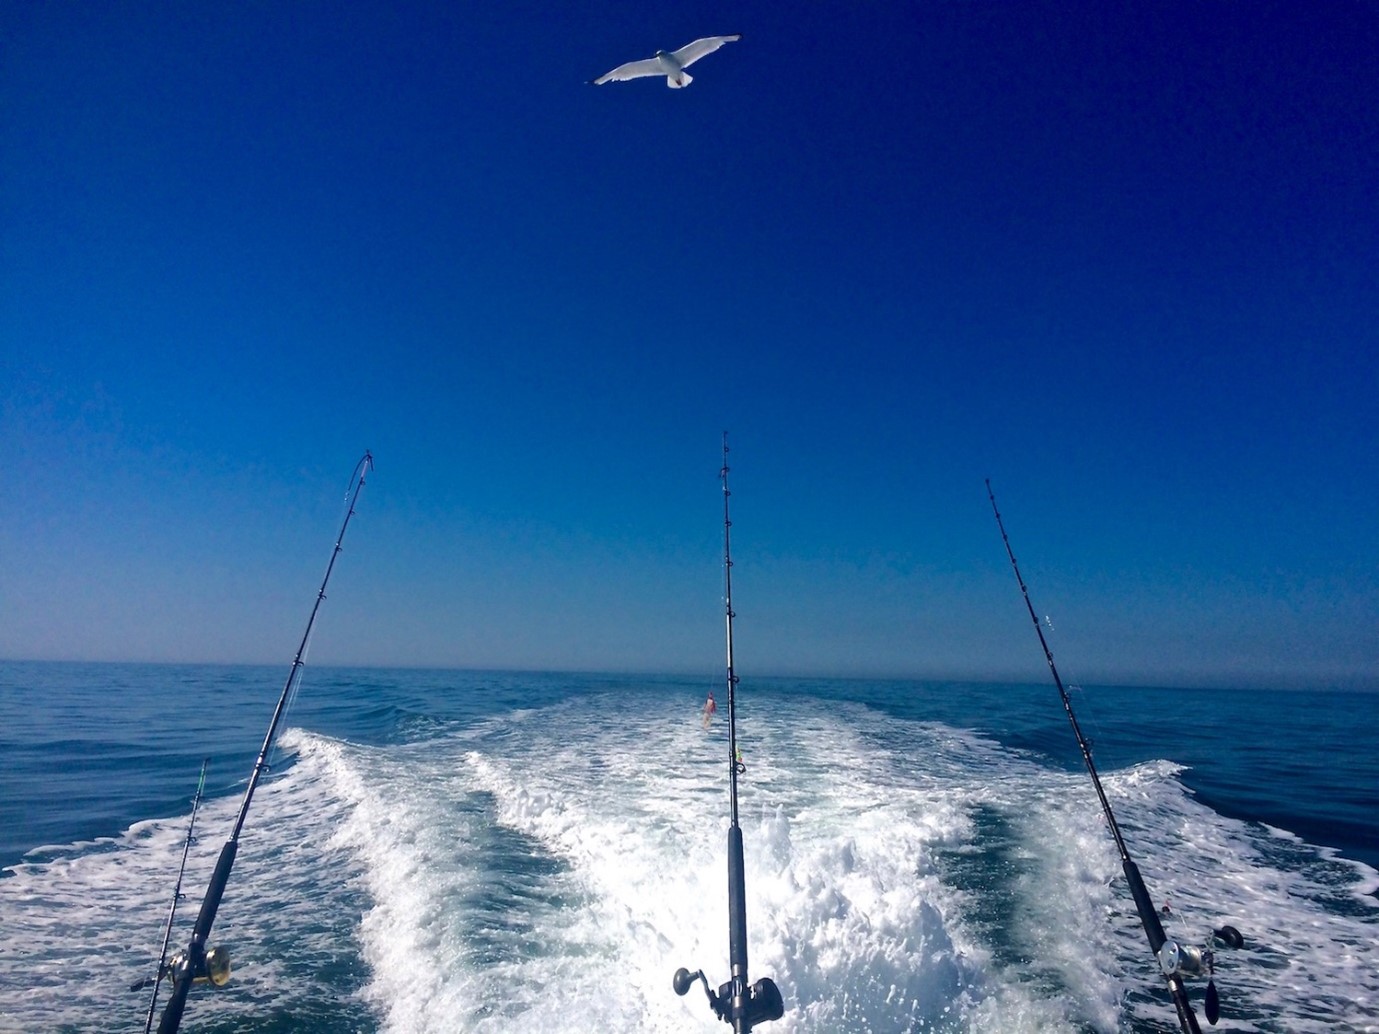 Private Fishing Trip – 3 hours